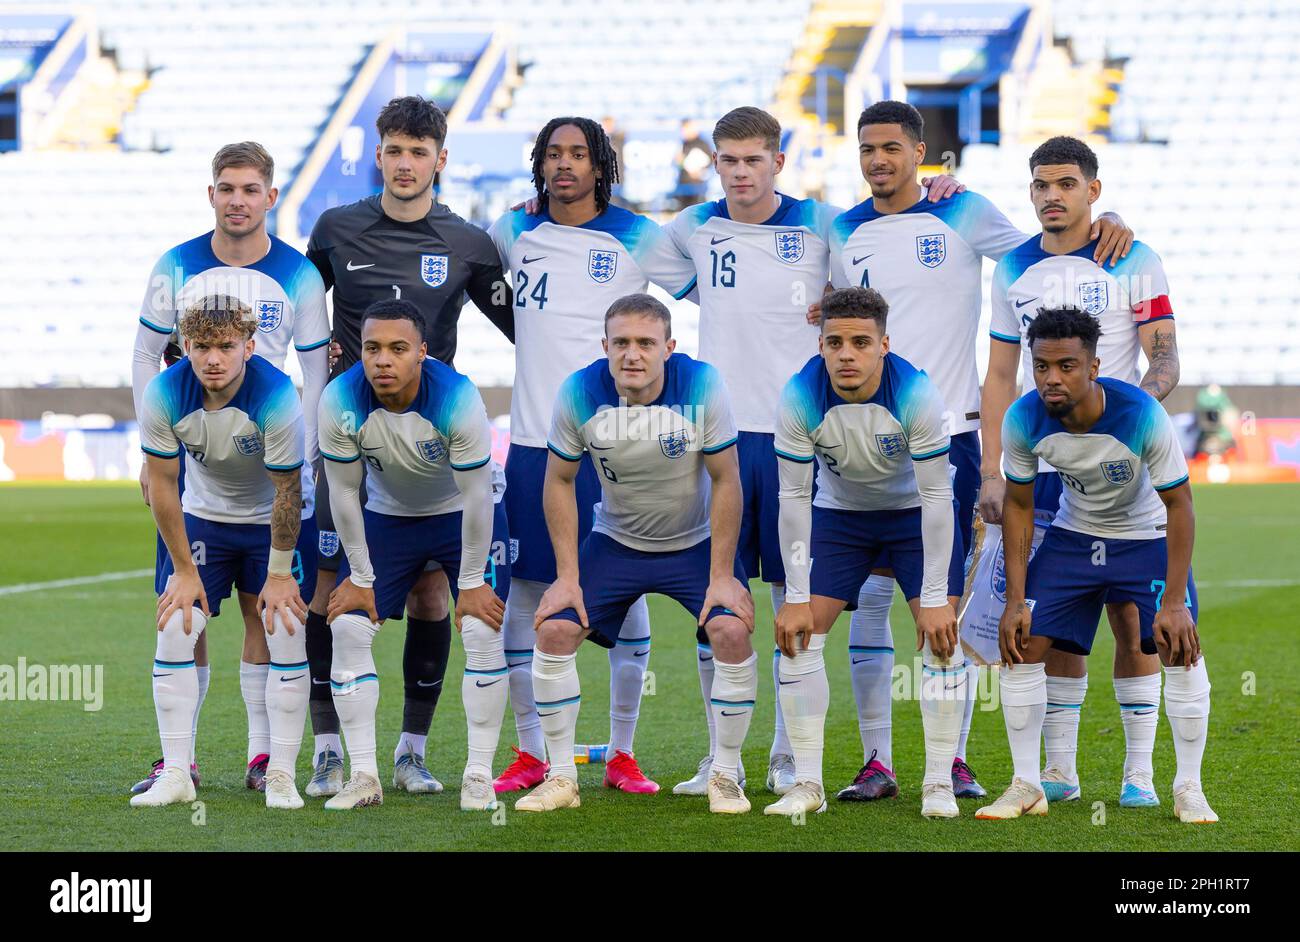 Leicester, UK. 25th Mar, 2023. Leicester, England, March 25th 2023: England team photo during the International Friendly football match between England and France at the King Power Stadium in Leicester, England. (James Whitehead/SPP) Credit: SPP Sport Press Photo. /Alamy Live News Stock Photo